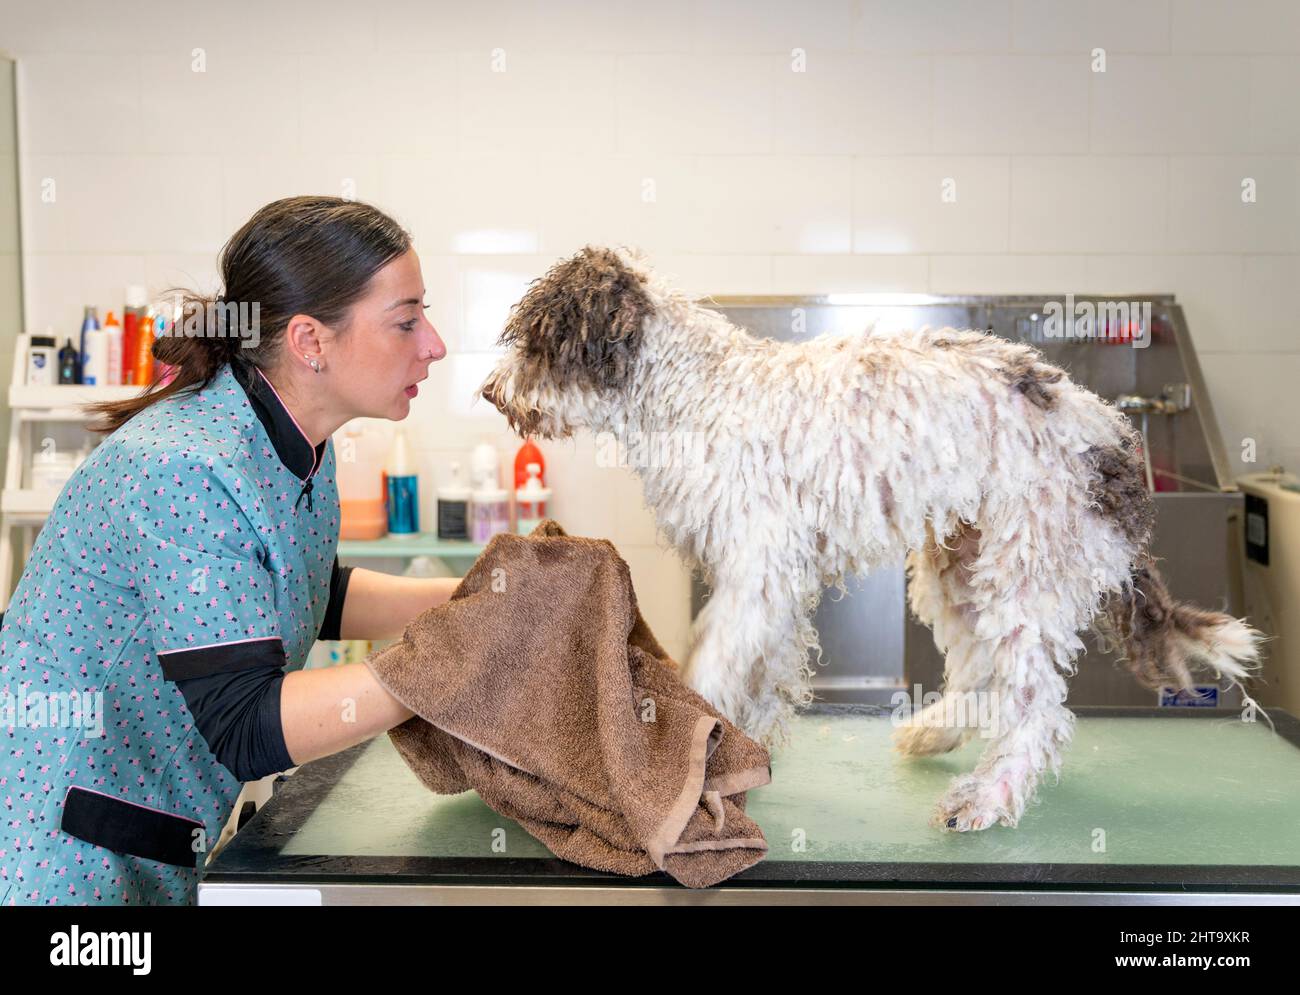 Young dog groomer drying up a Spanish water dog on a working table after bath making eye contact Stock Photo